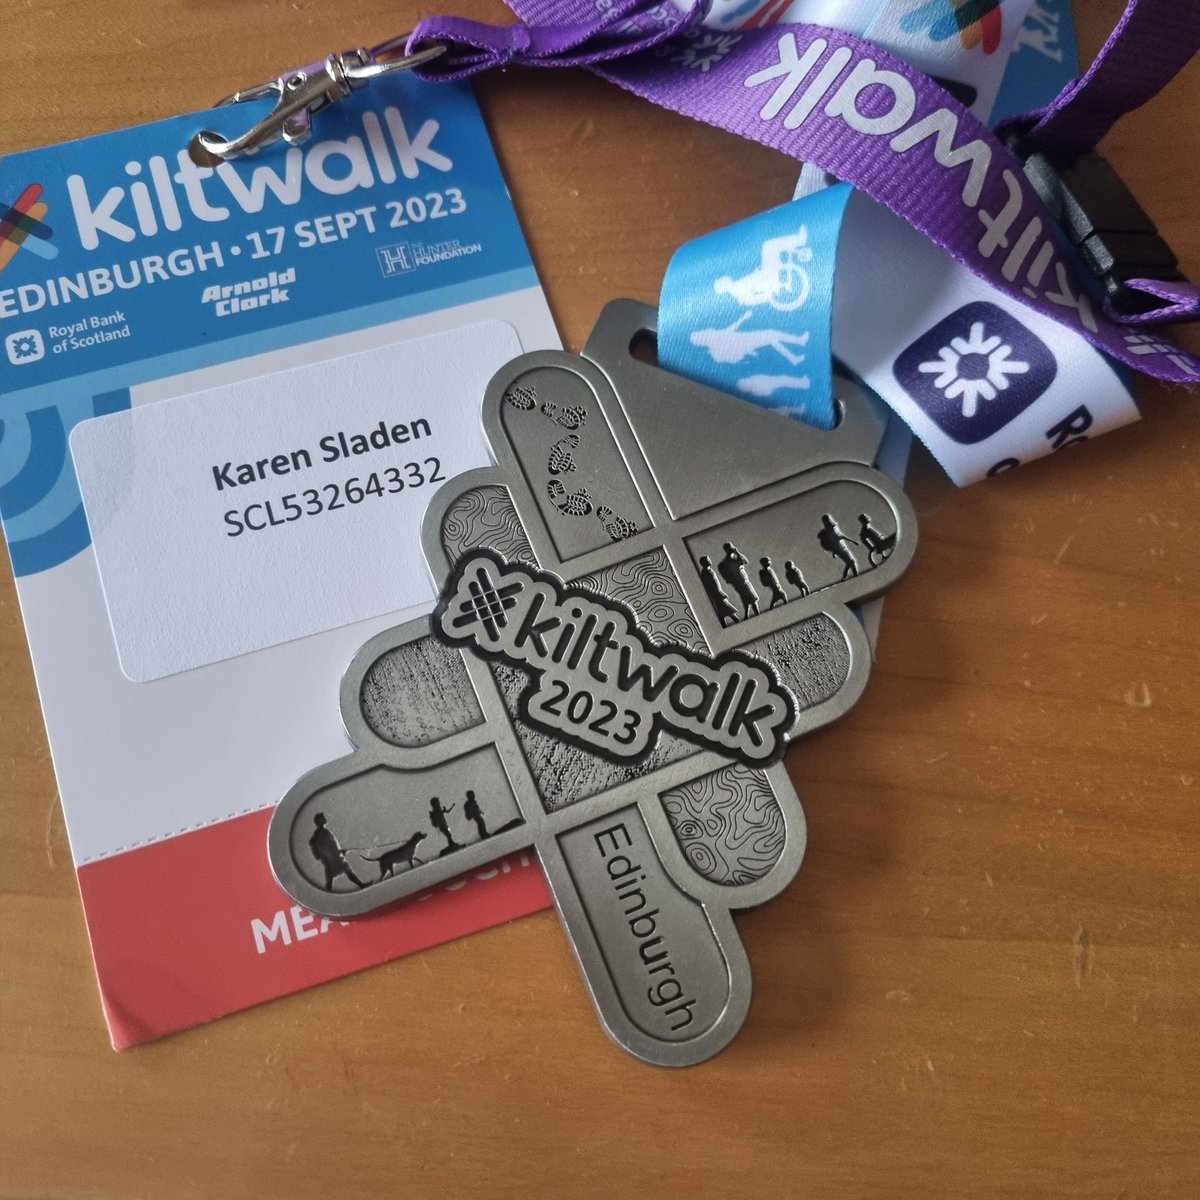 Fab day at #KiltwalkEdinburgh Walking, chatting, laughing and raising money for charity. Great way to spend a Sunday.